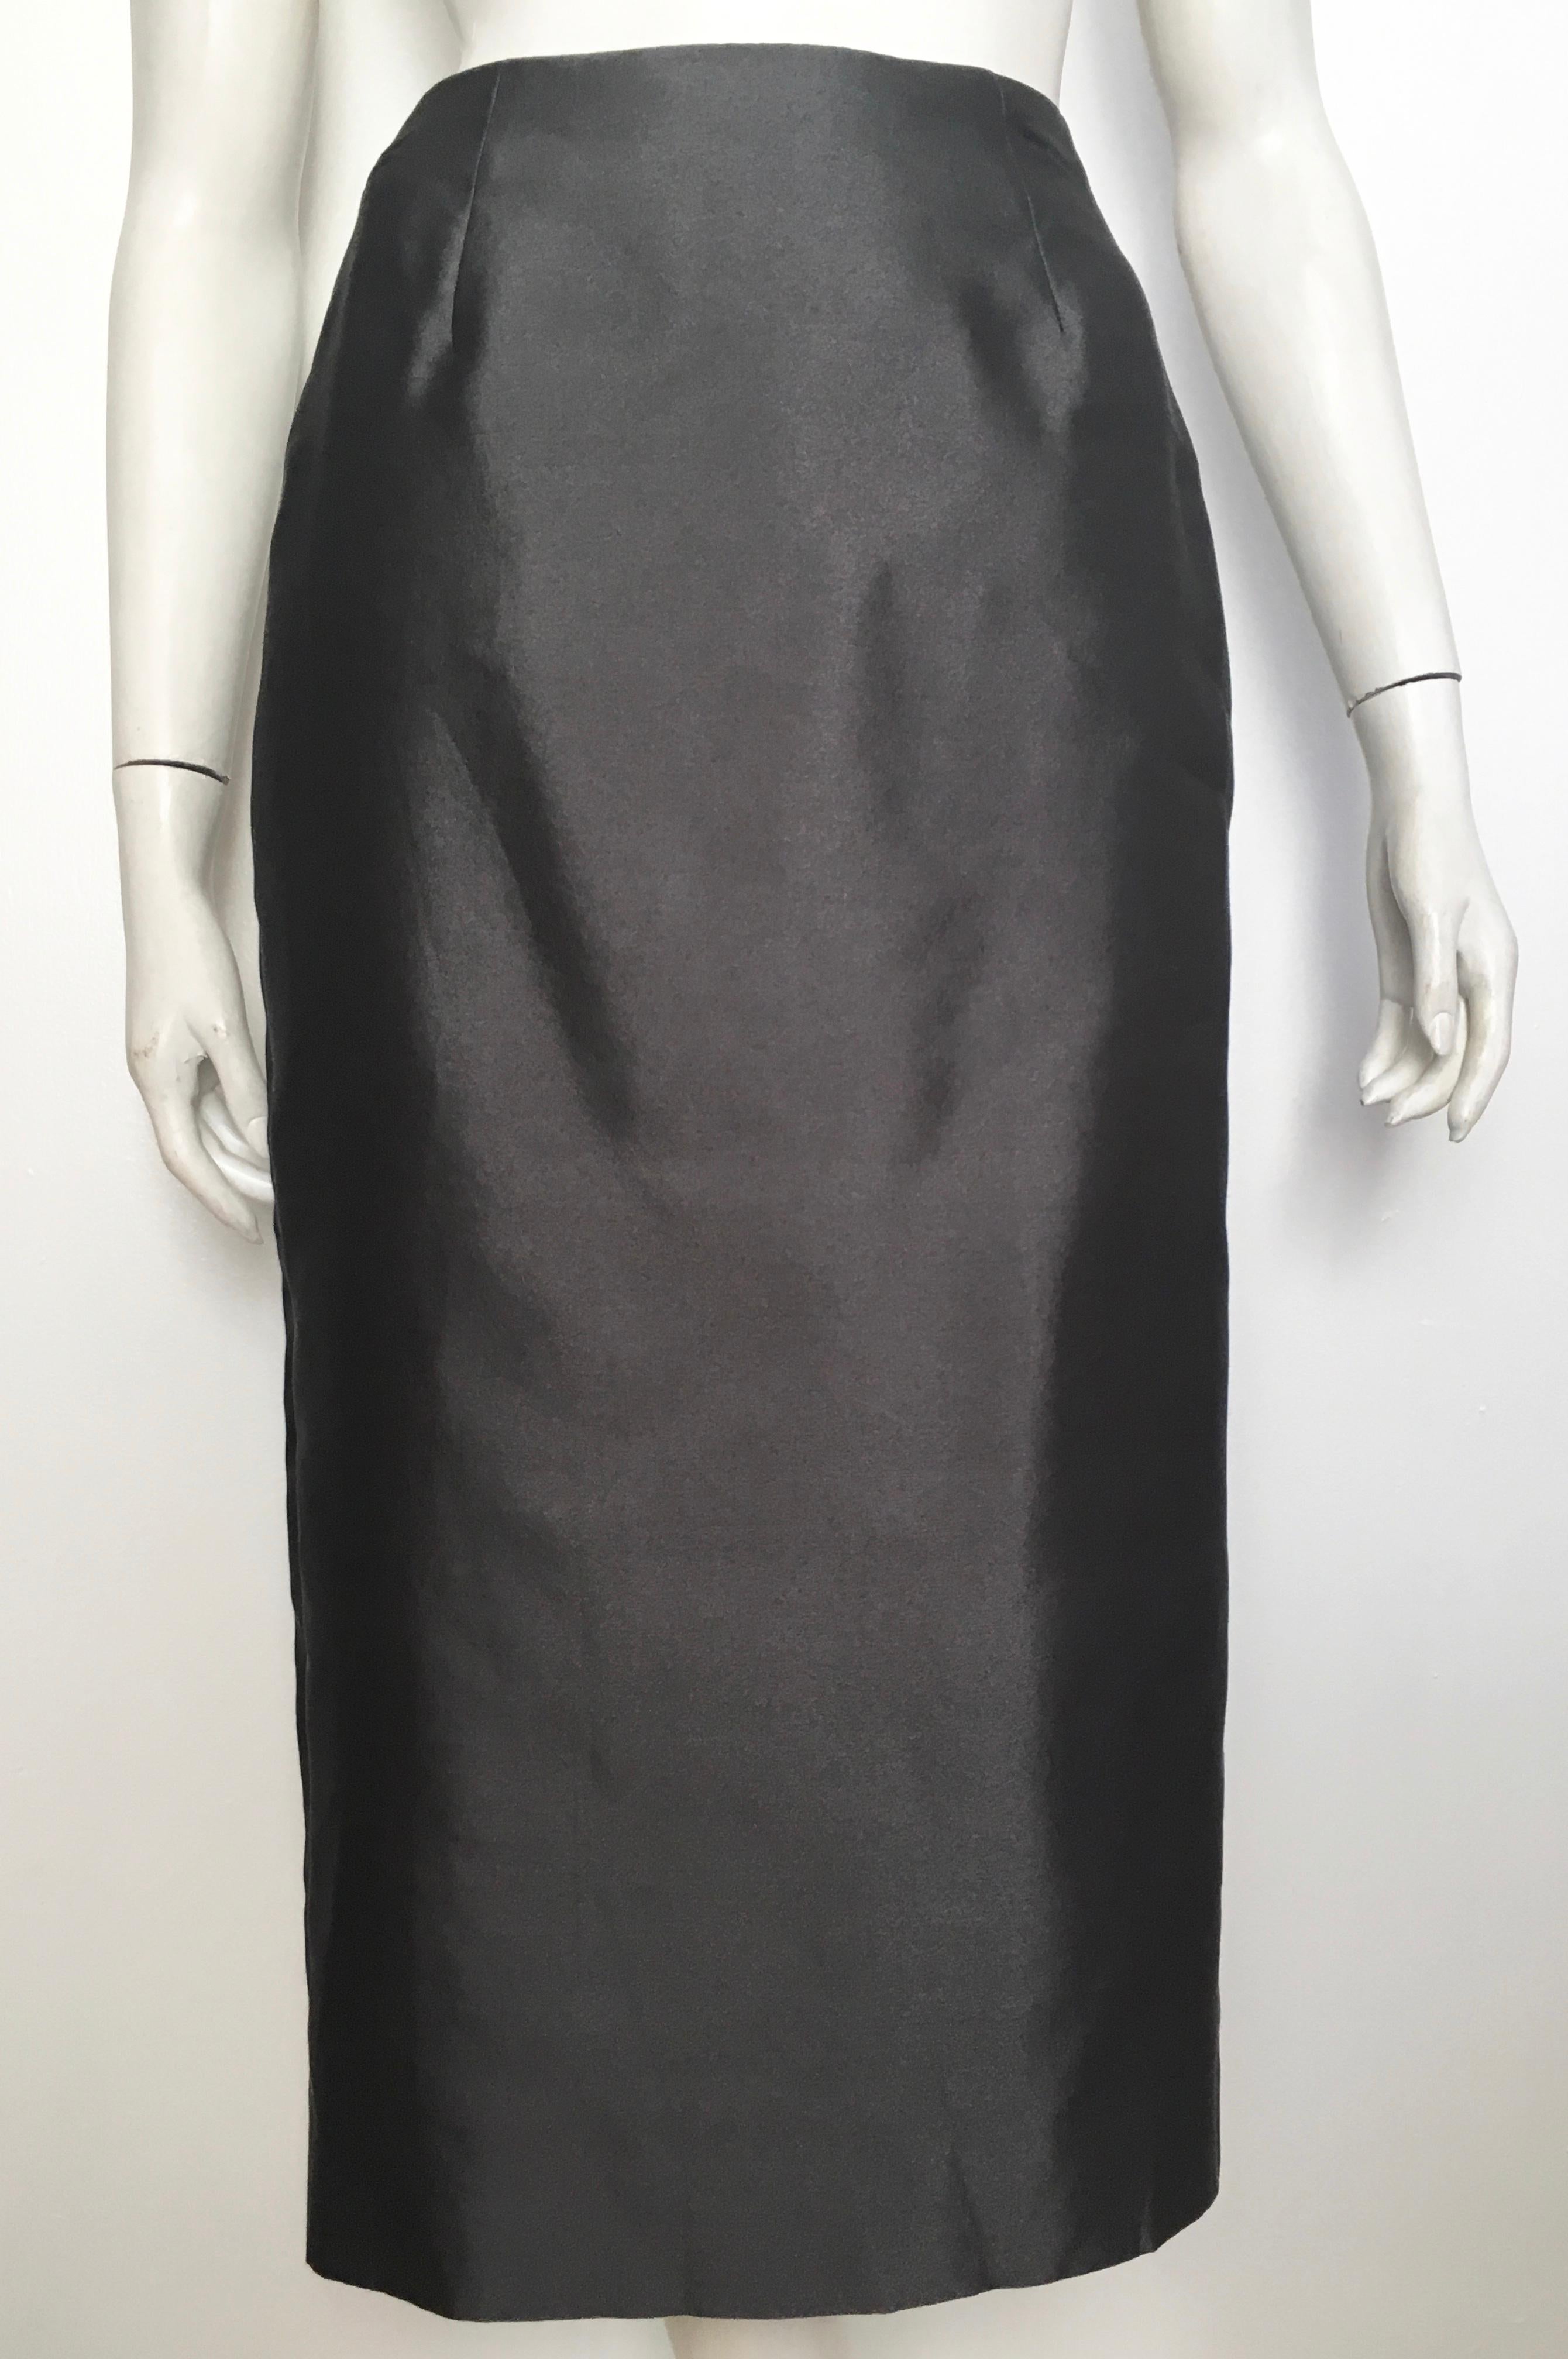 Donna Karan for Bergdorf Goodman 1990s gray silk - cashmere blend long skirt is labeled a size 4.  The waist on this skirt is 29